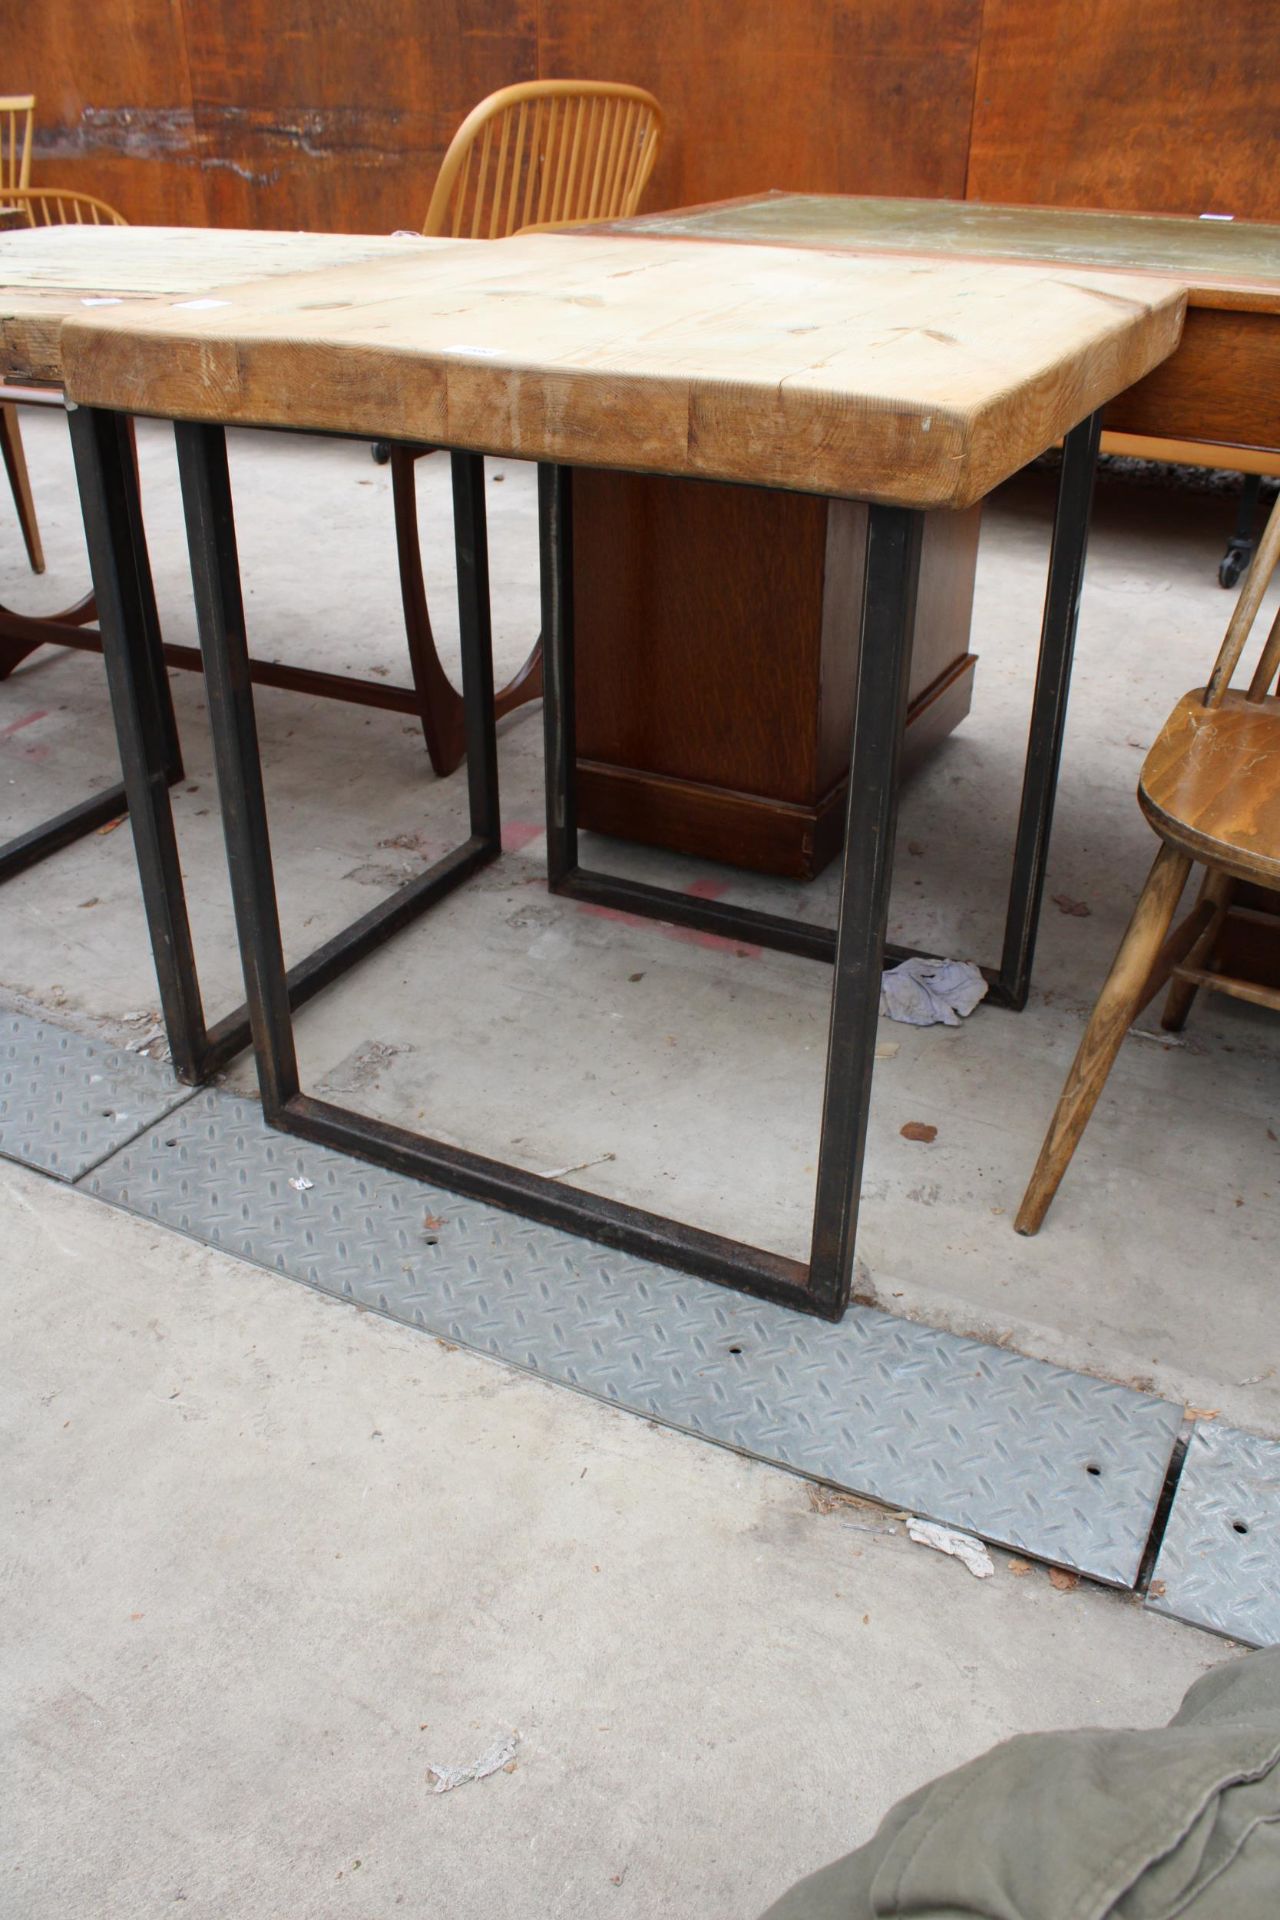 A RUSTIC FOUR PLANK TABLE, 27" SQUARE ON METAL LEGS - Image 2 of 2